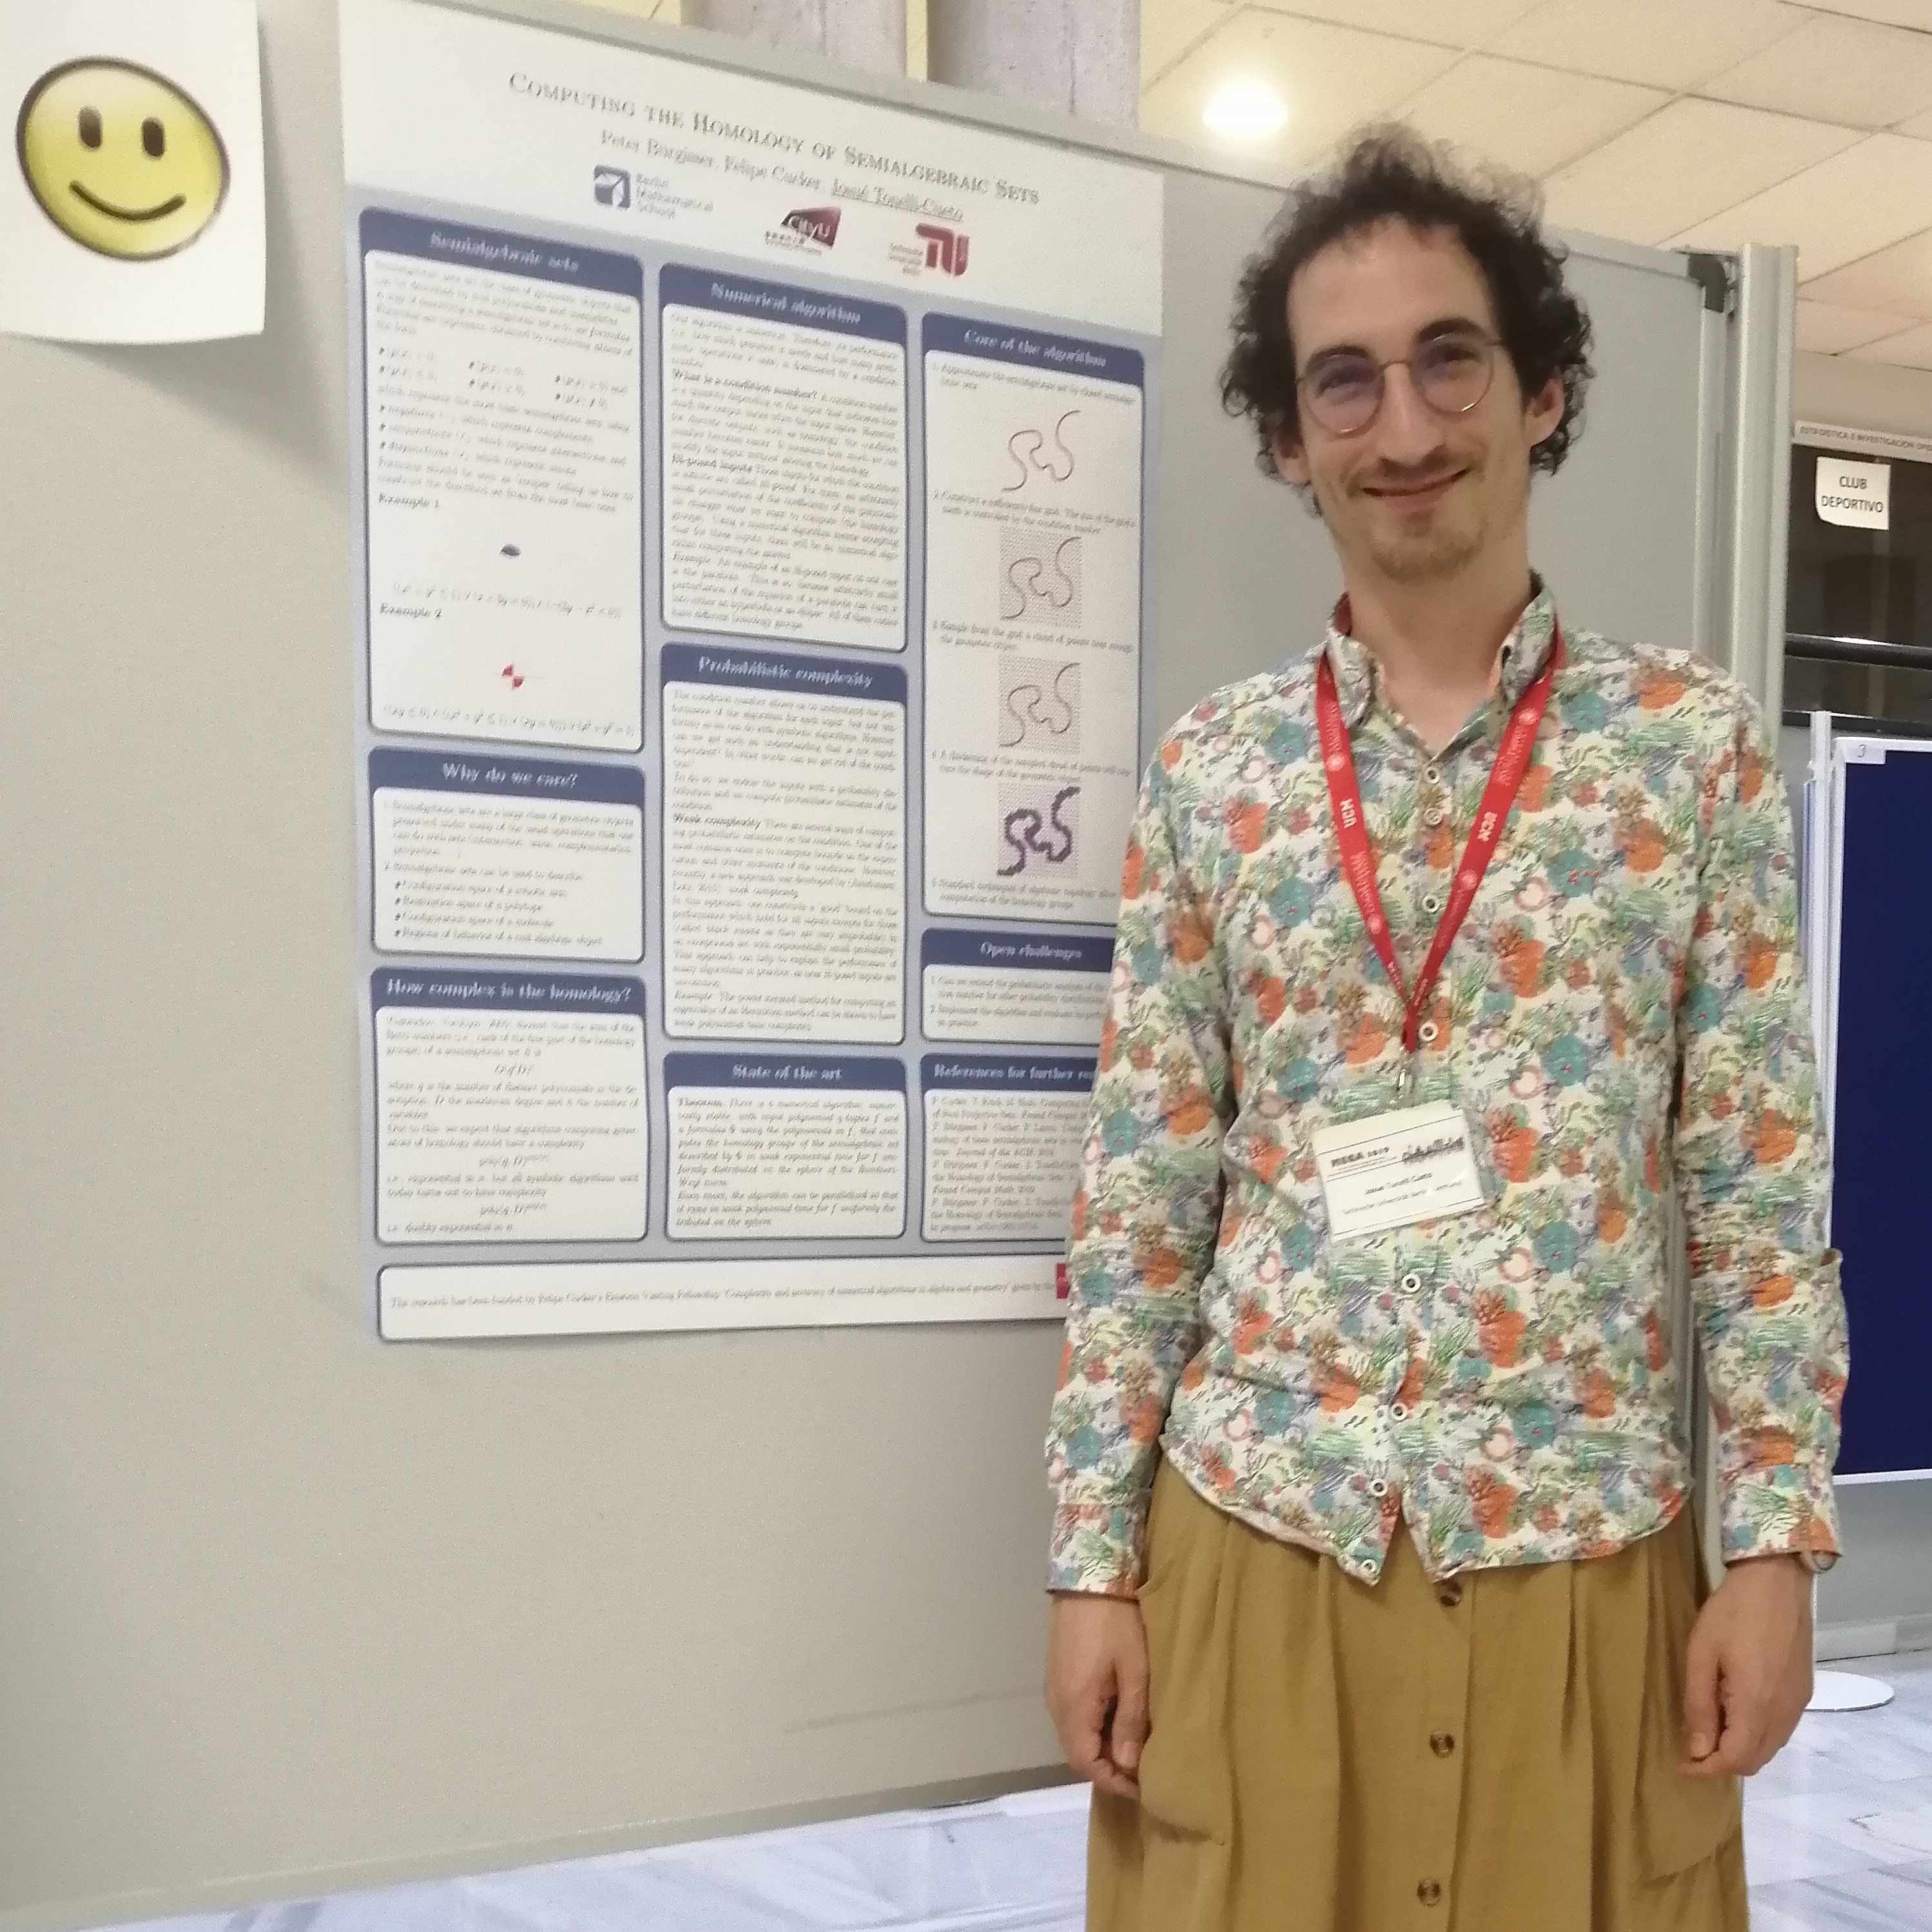 Josué Tonelli-Cueto in front of his poster at the MEGA 2019